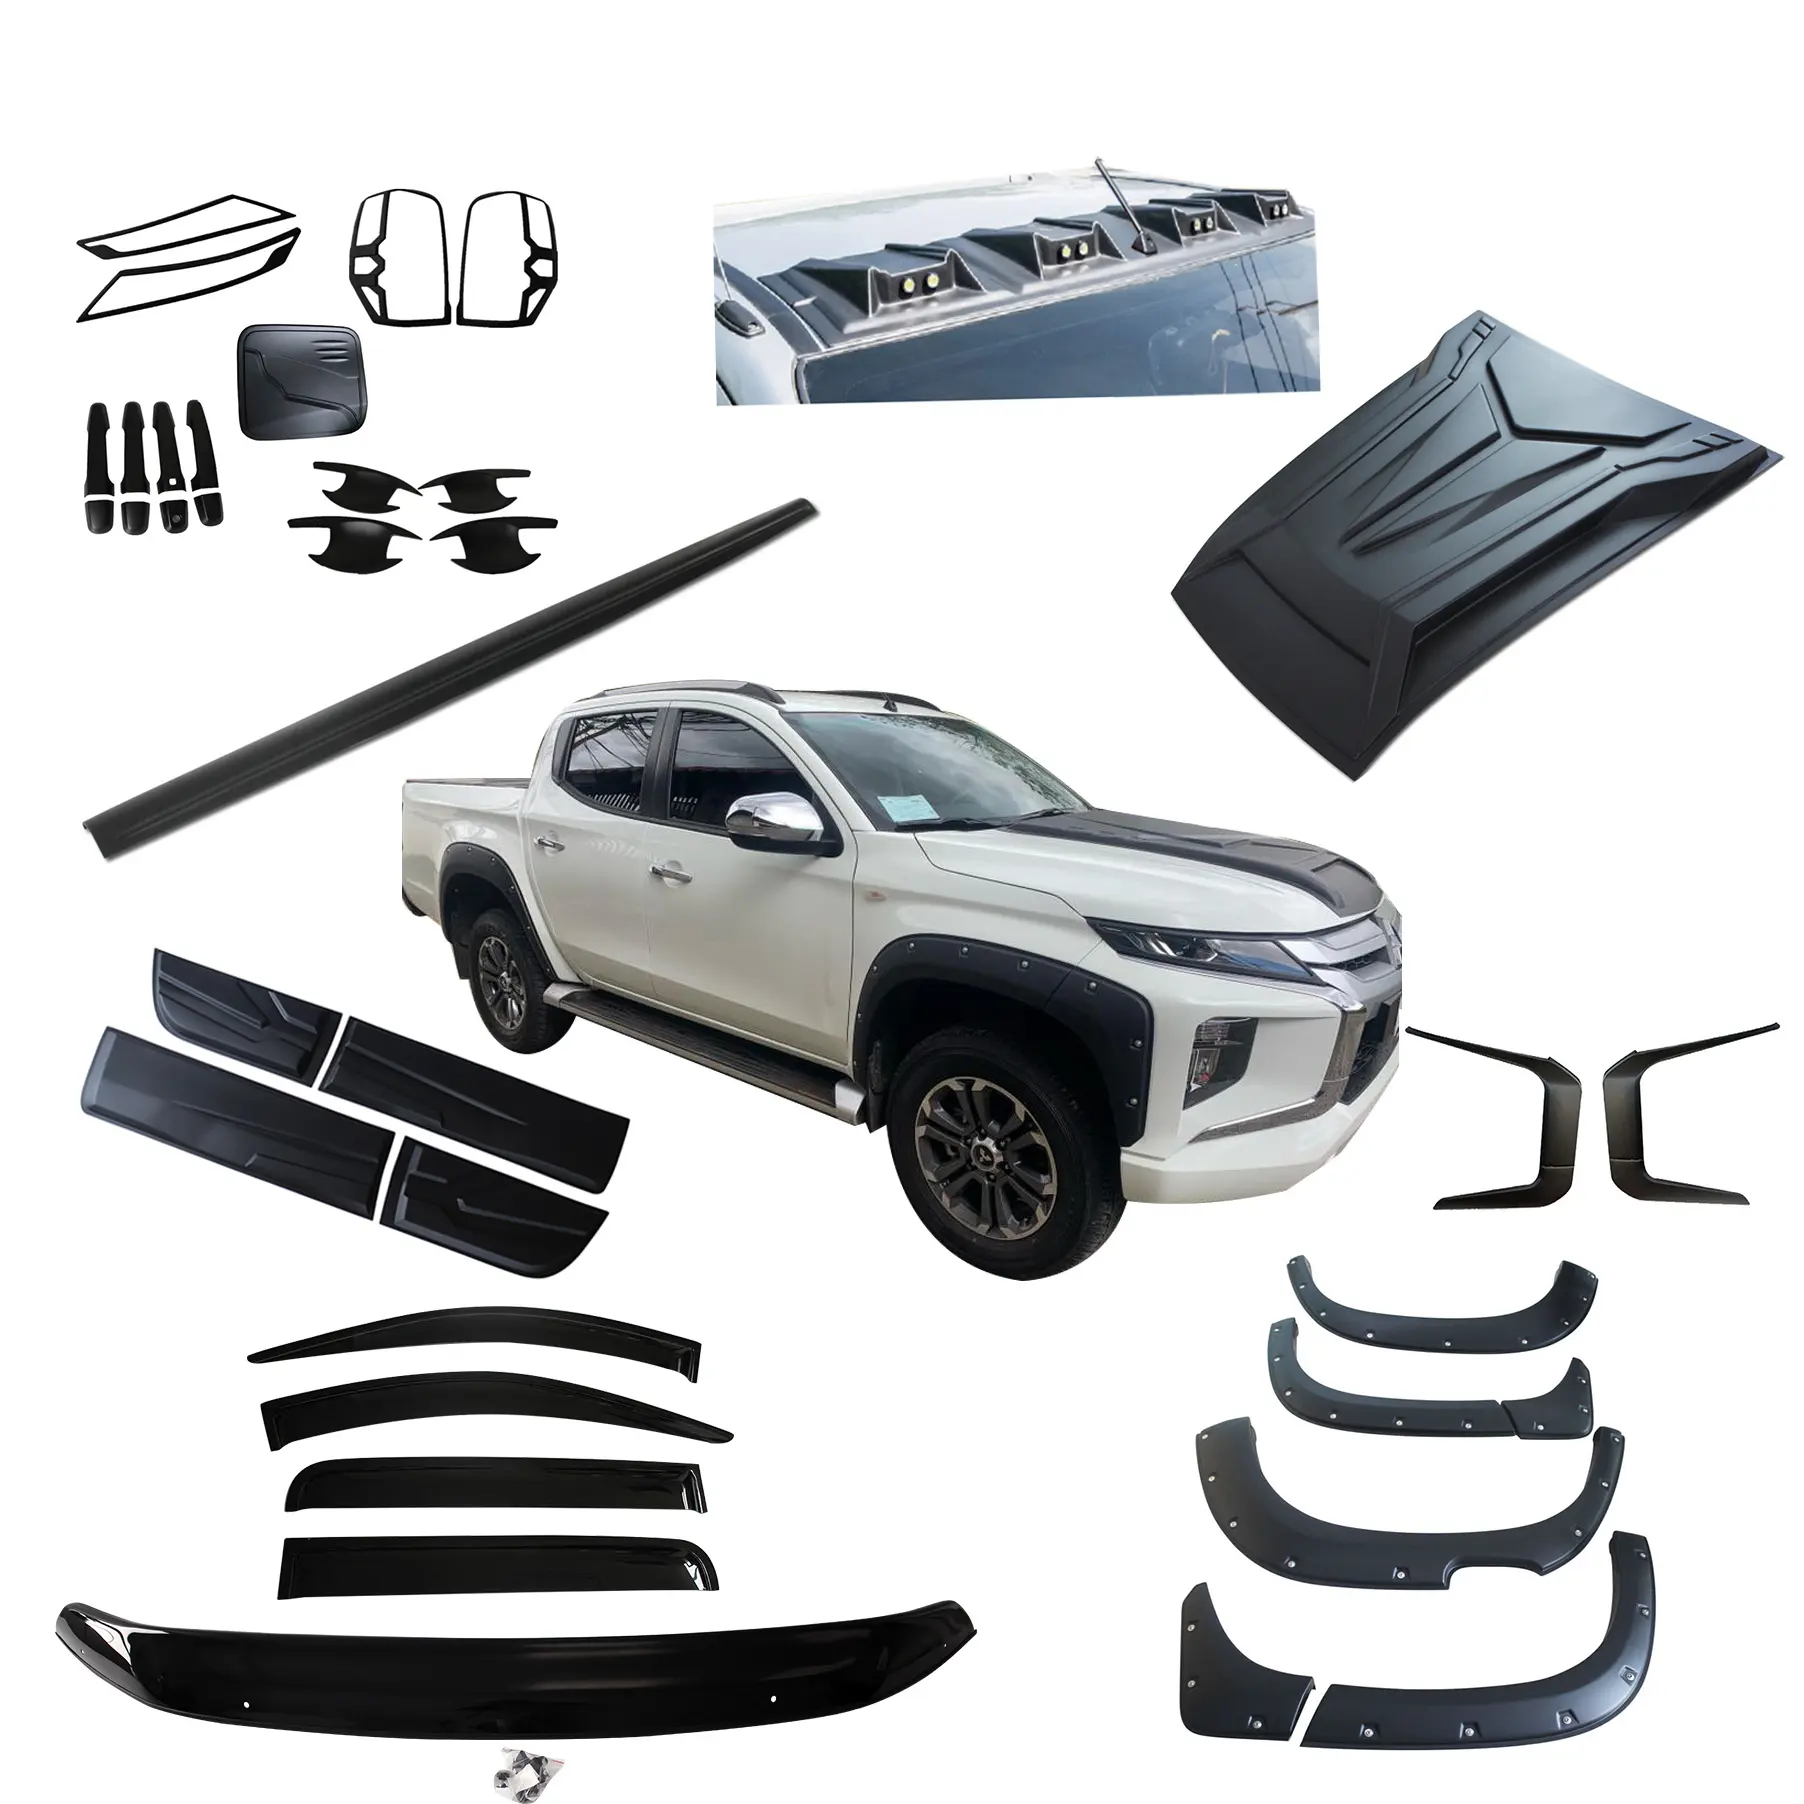 Combo Set for Mitsubishi L200 Triton 2019 2020 offroad 4x4 headlight Tail Light Cover Fender Flare Kit Exterior Accessories